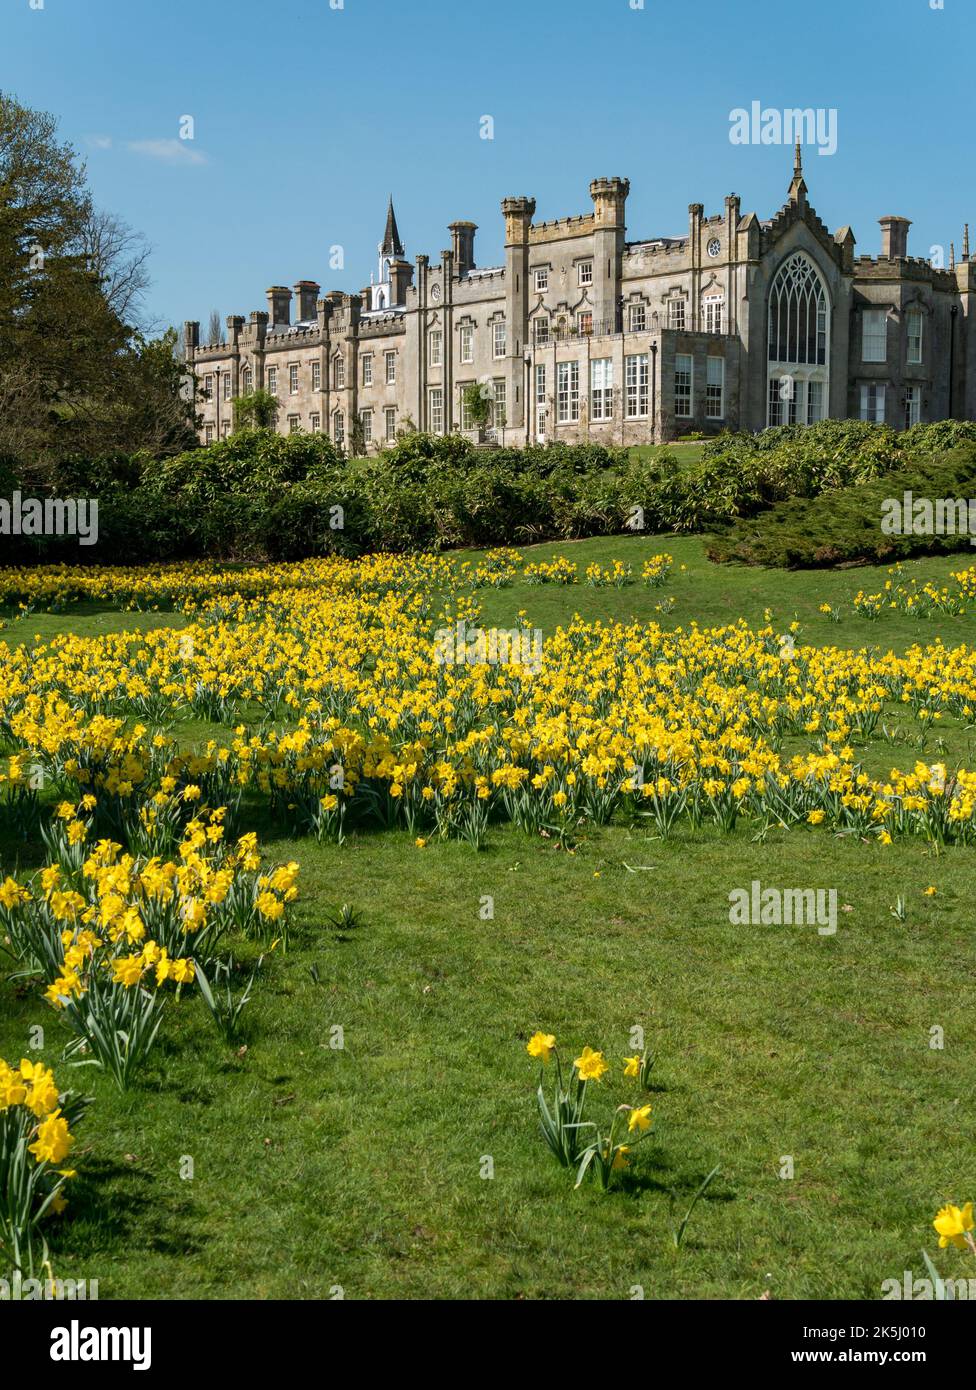 Sheffield Park House and Gardens con Daffodils gialli a Spring, East Sussex, Inghilterra, Regno Unito Foto Stock